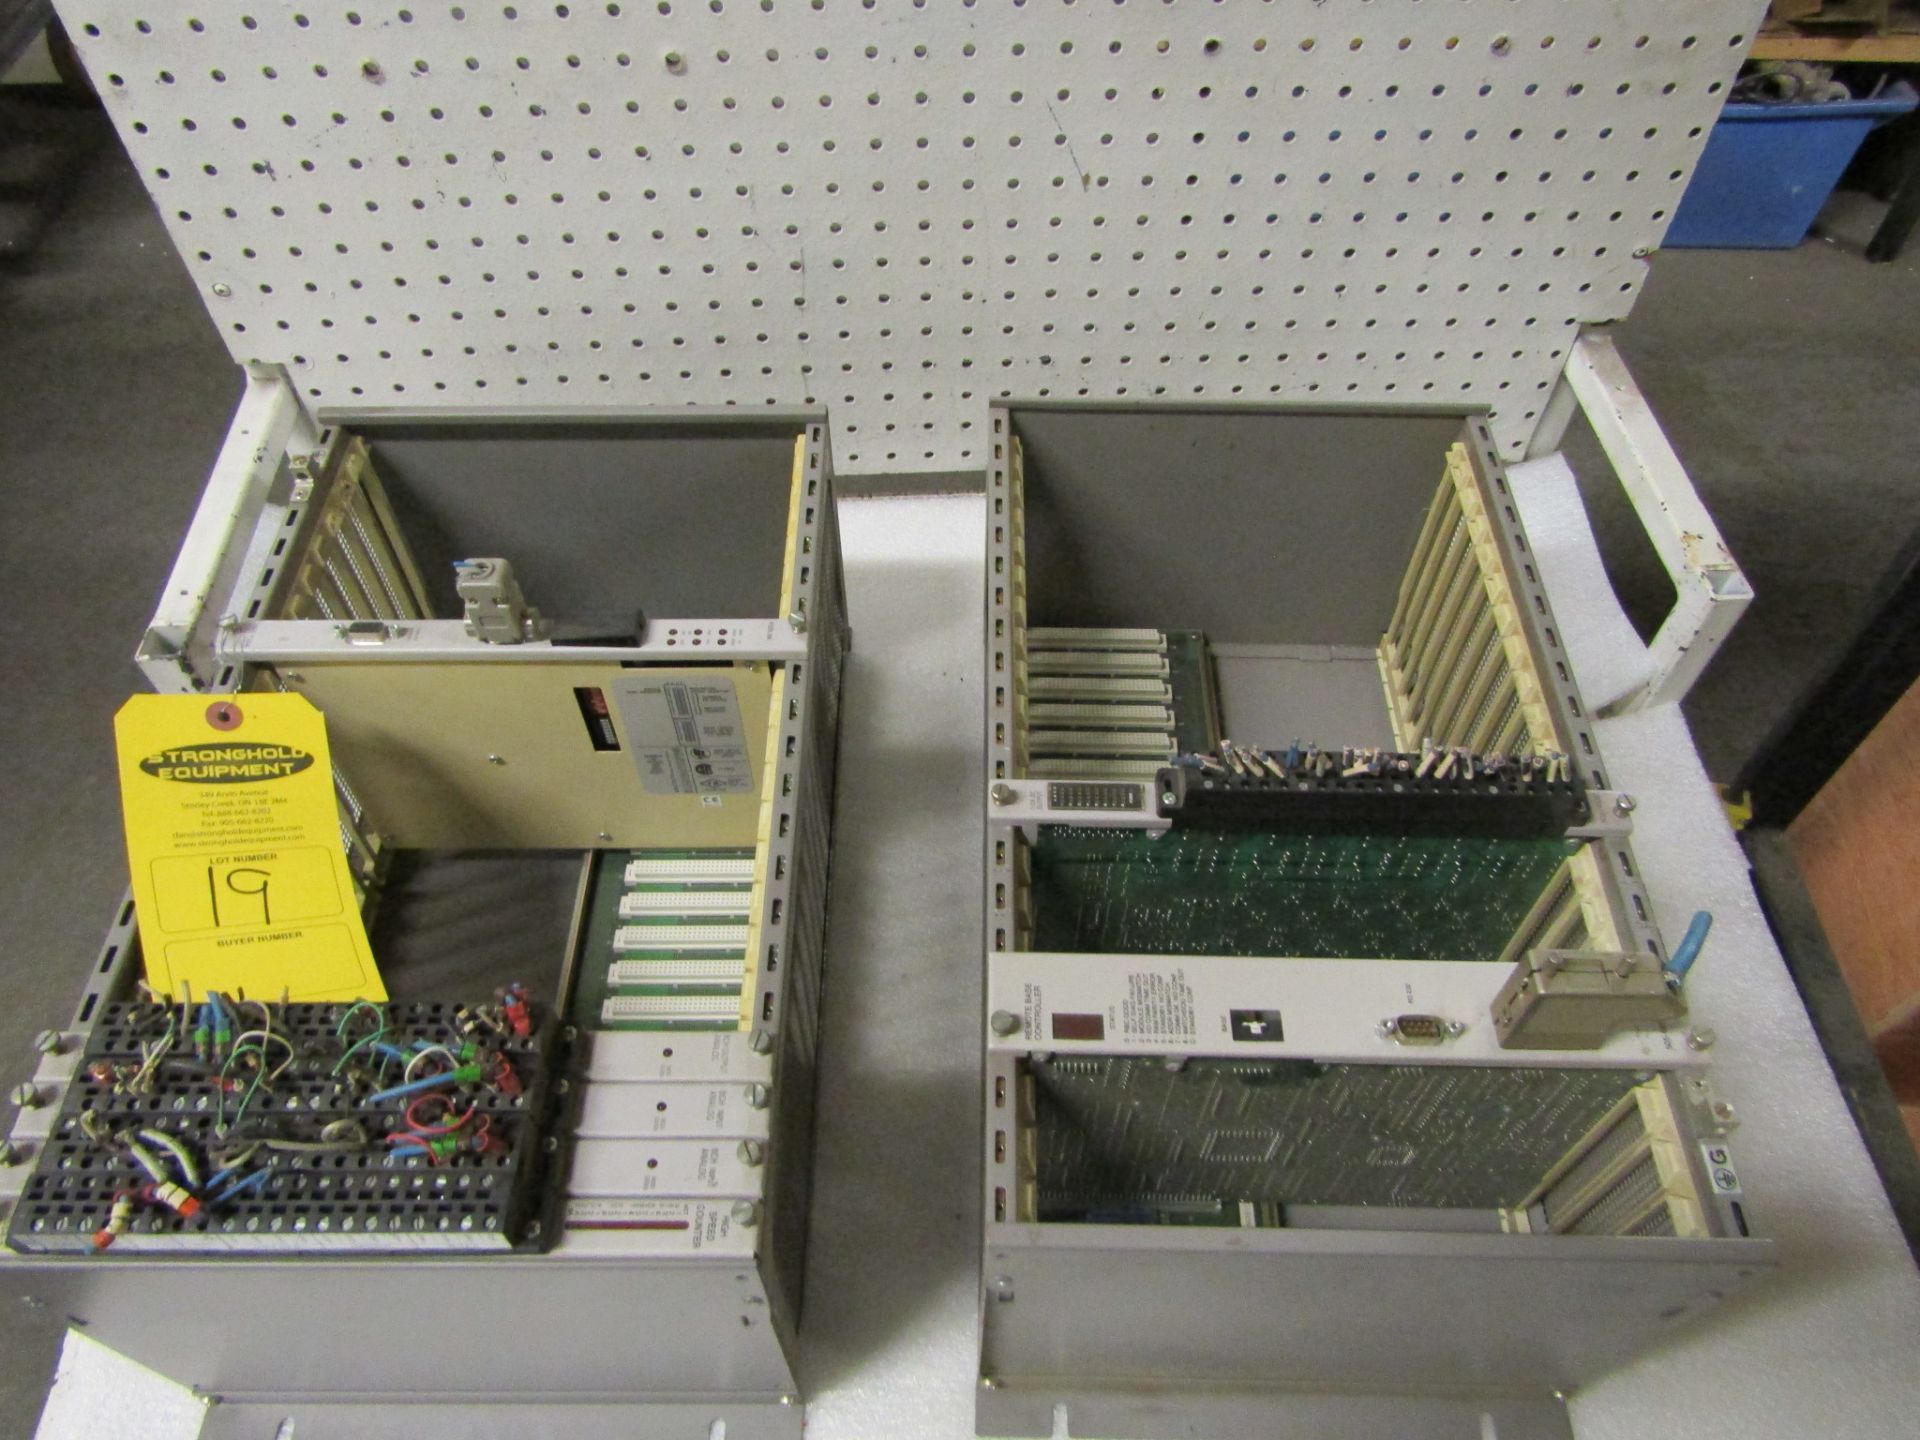 Lot of 2 (2 units) Siemens PLC Remote Controller Base Racks with modules as pictured